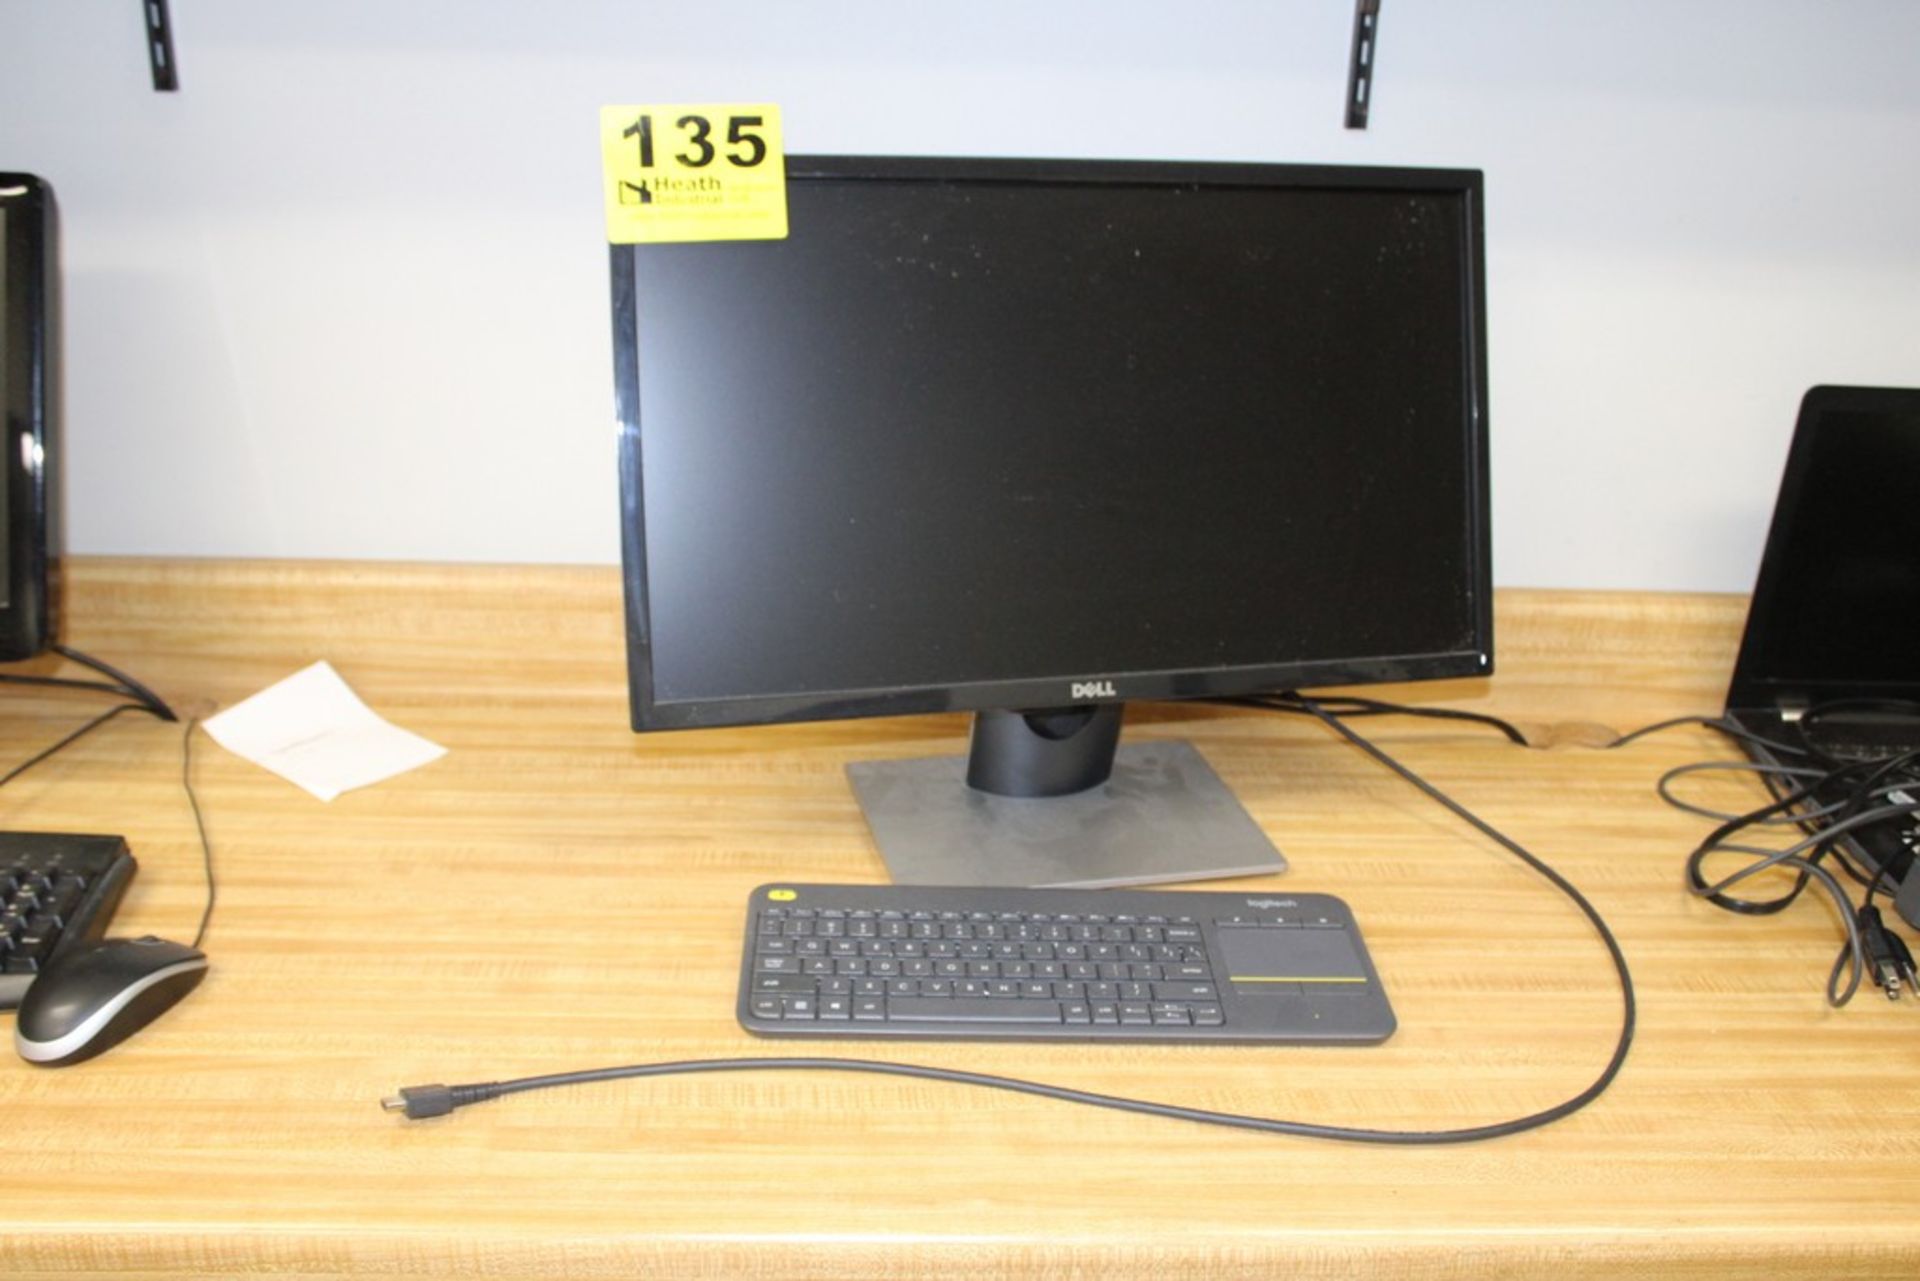 IBM THINKCENTRE PR6 DESKTOP COMPUTER, WITH INTEL CORE I5, FLATSCREEN MONITOR, KEYBOARD AND MOUSE